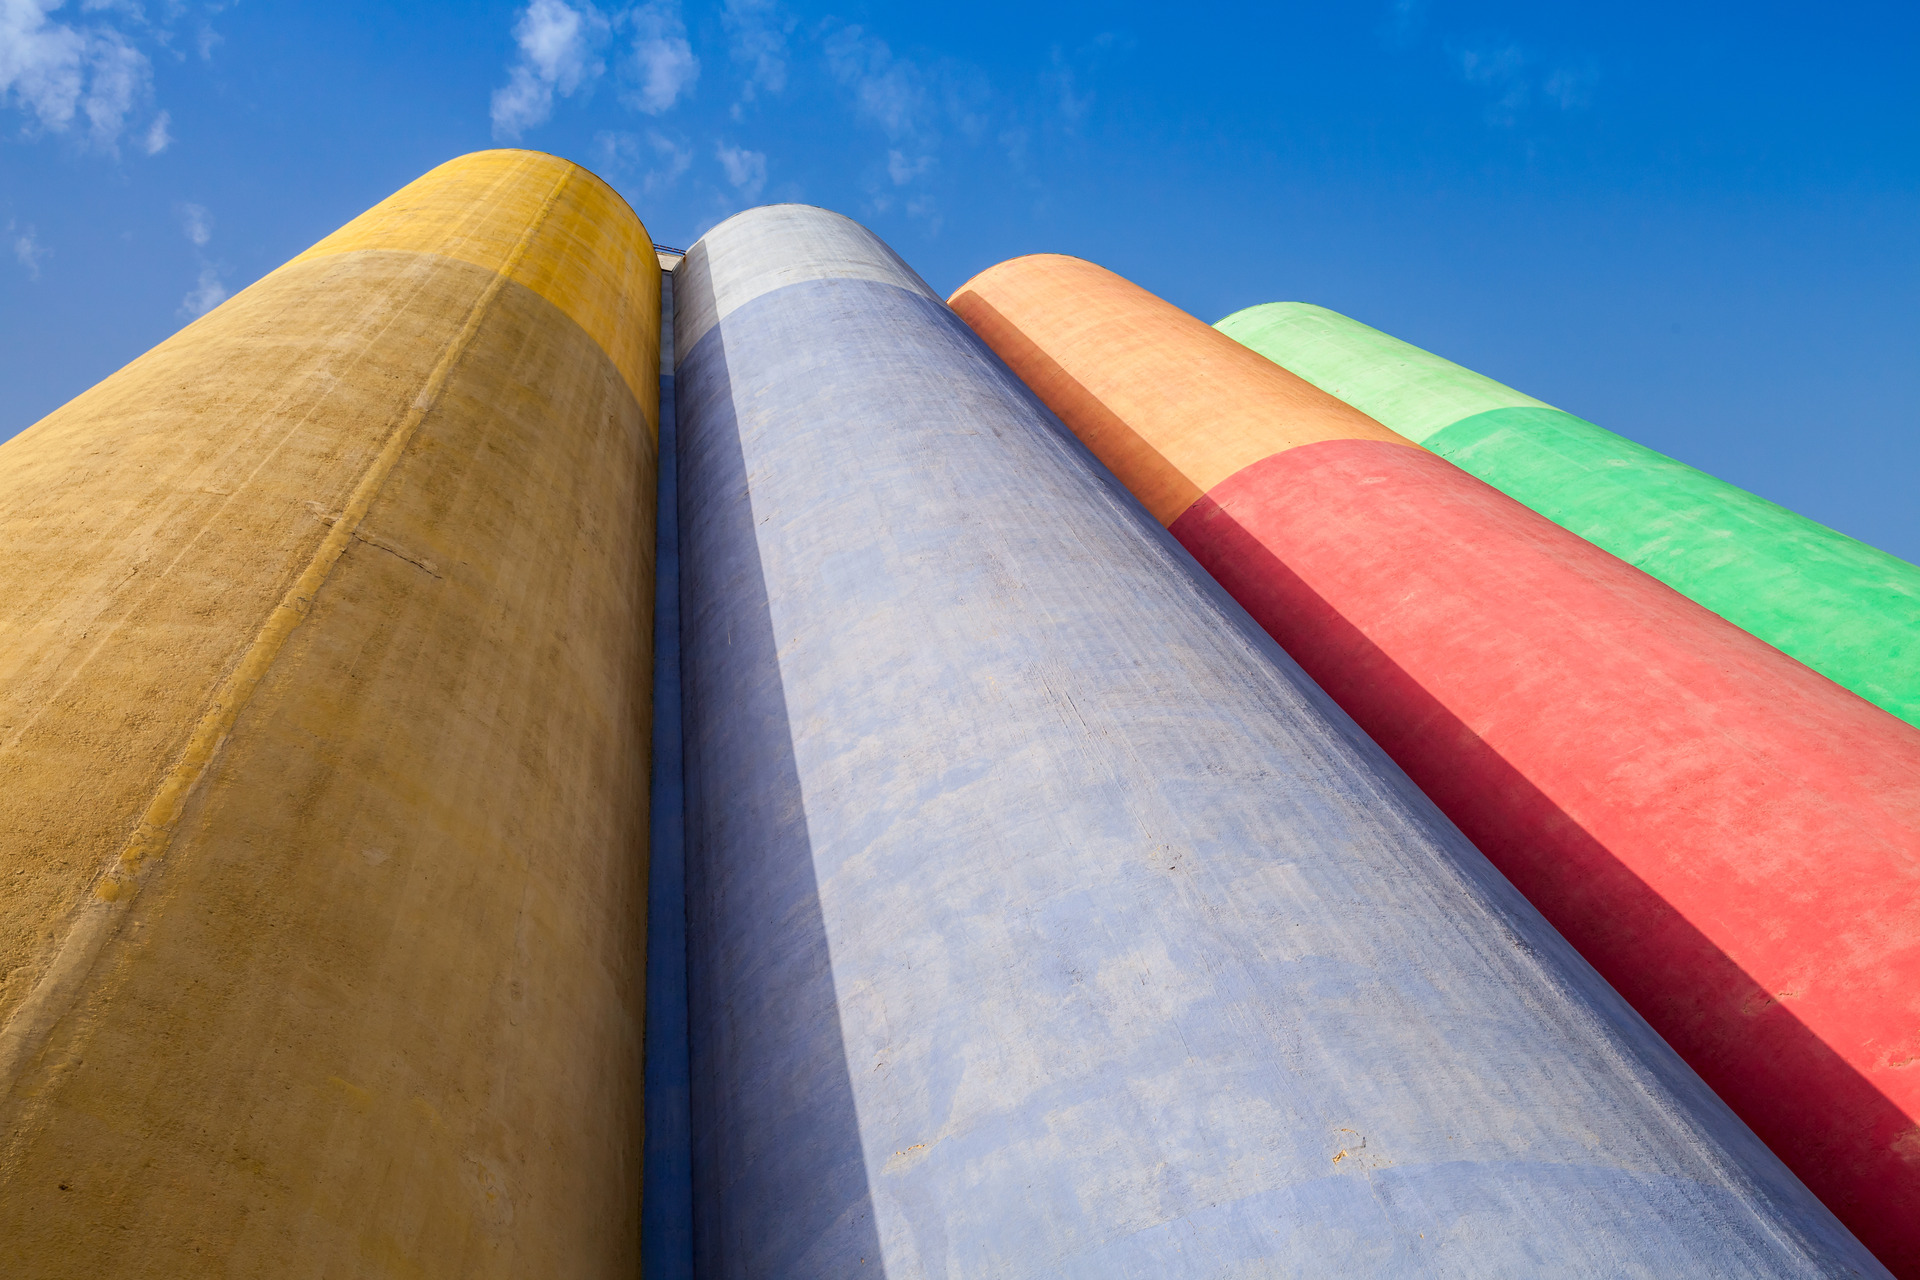 Abstract industrial architecture fragment, large colorful tanks made of concrete for storage of bulk materials